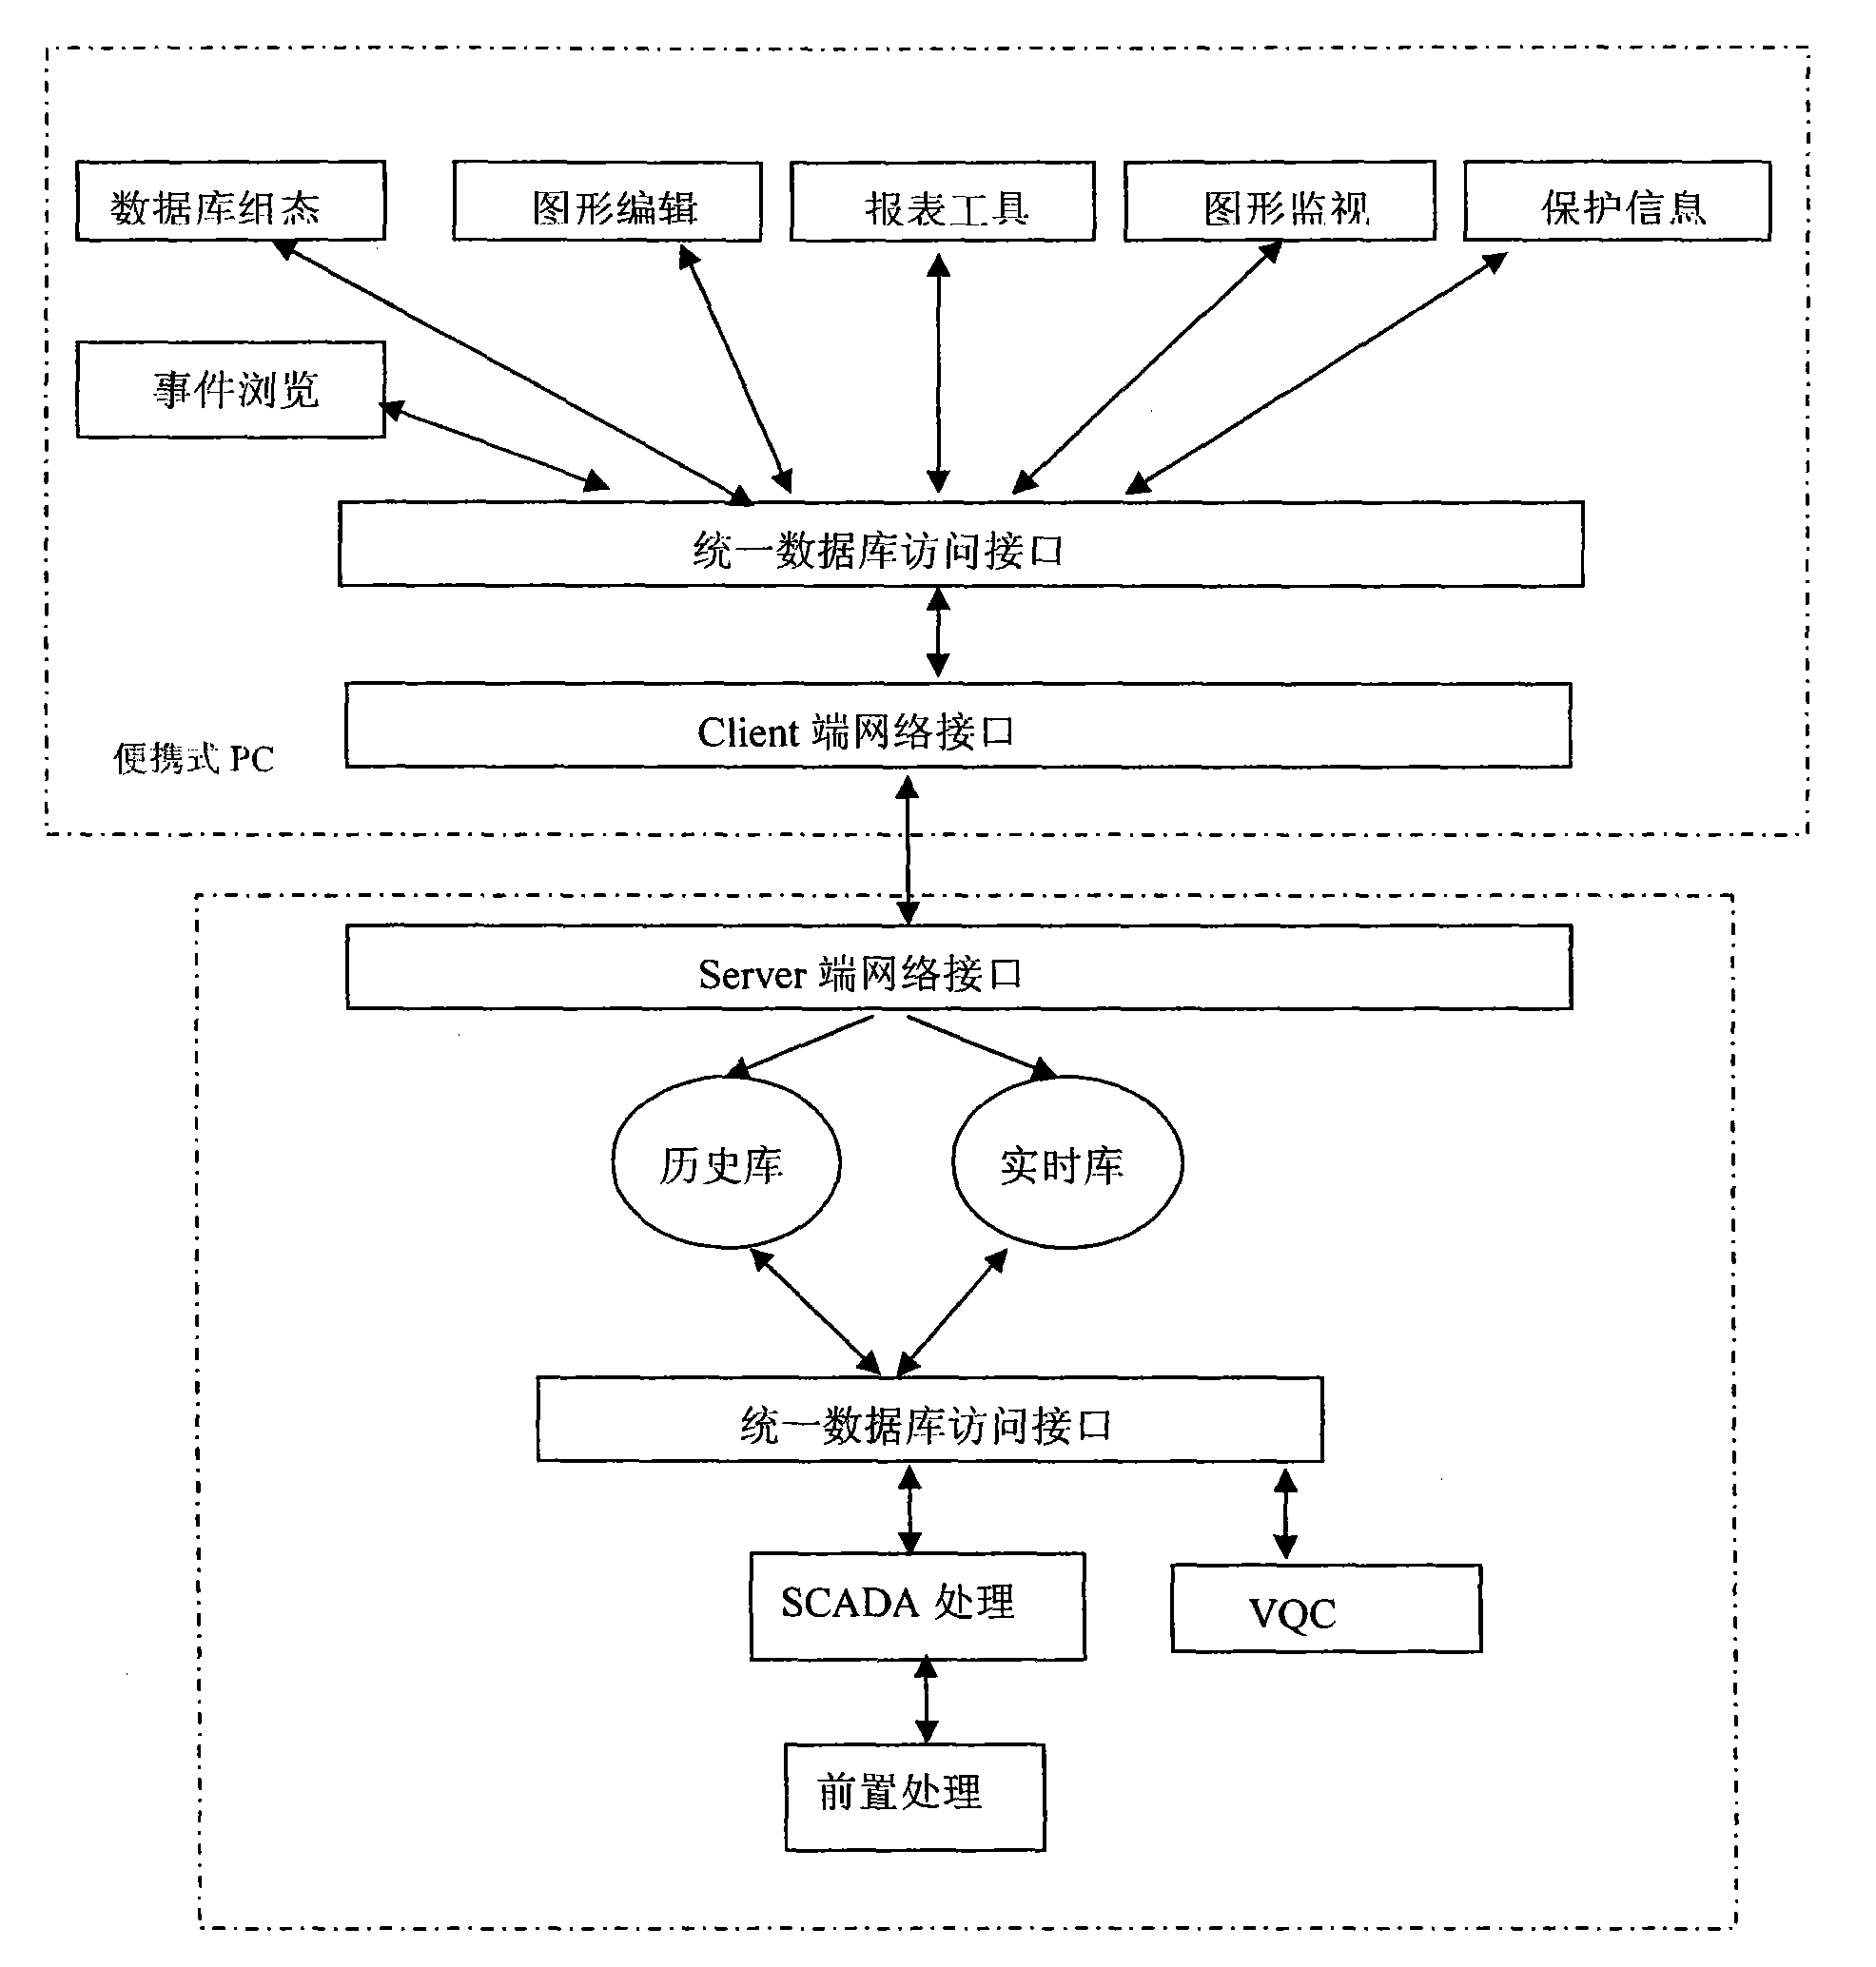 Method for achieving background monitoring based on embedded device